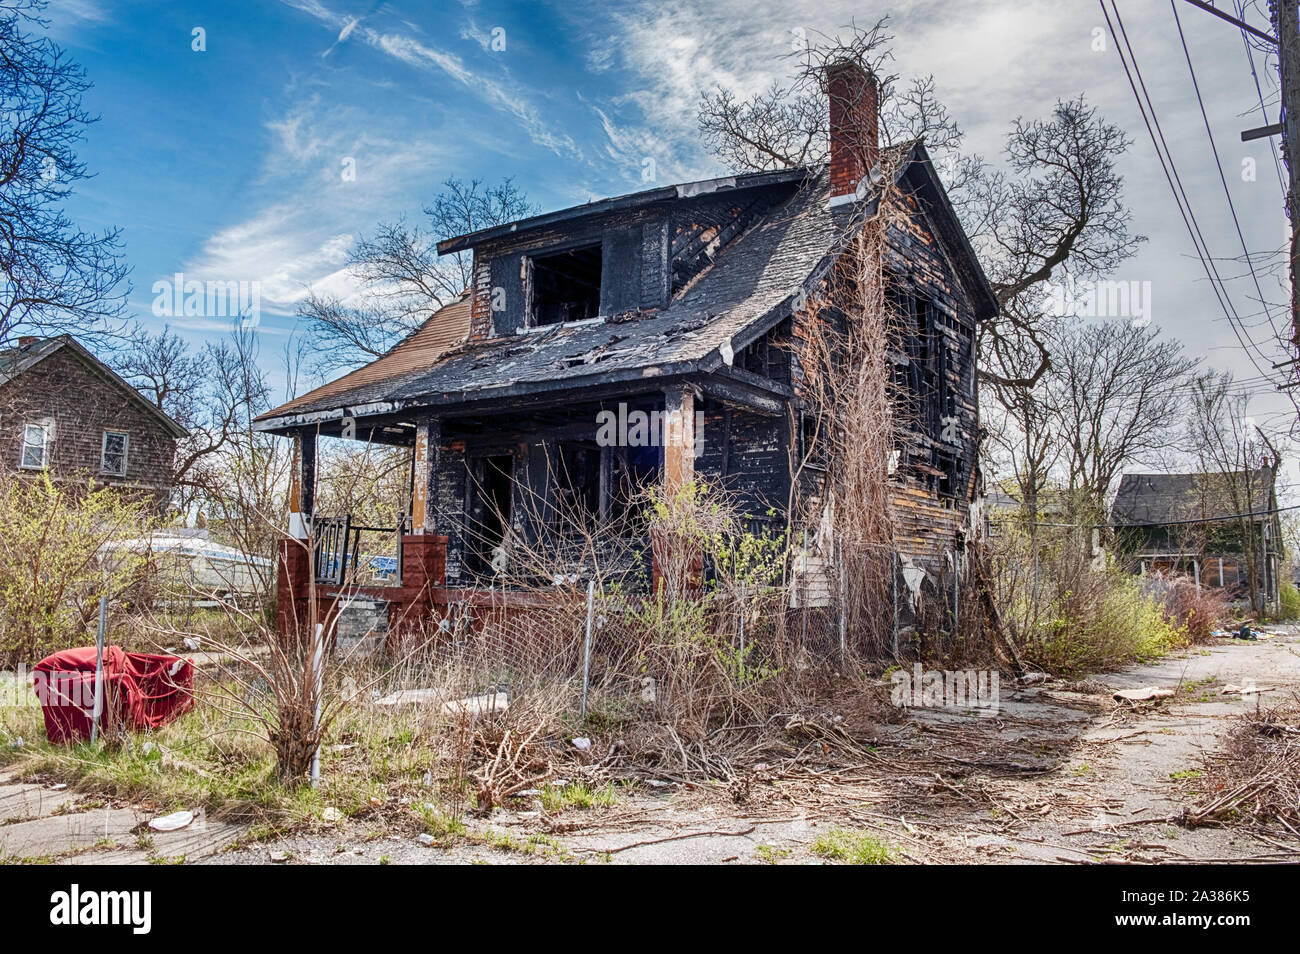 DETROIT, MICHIGAN - APRIL 27, 2019:  An old house in Detroit is blackened with smoke damage after having sustained a fire. Stock Photo